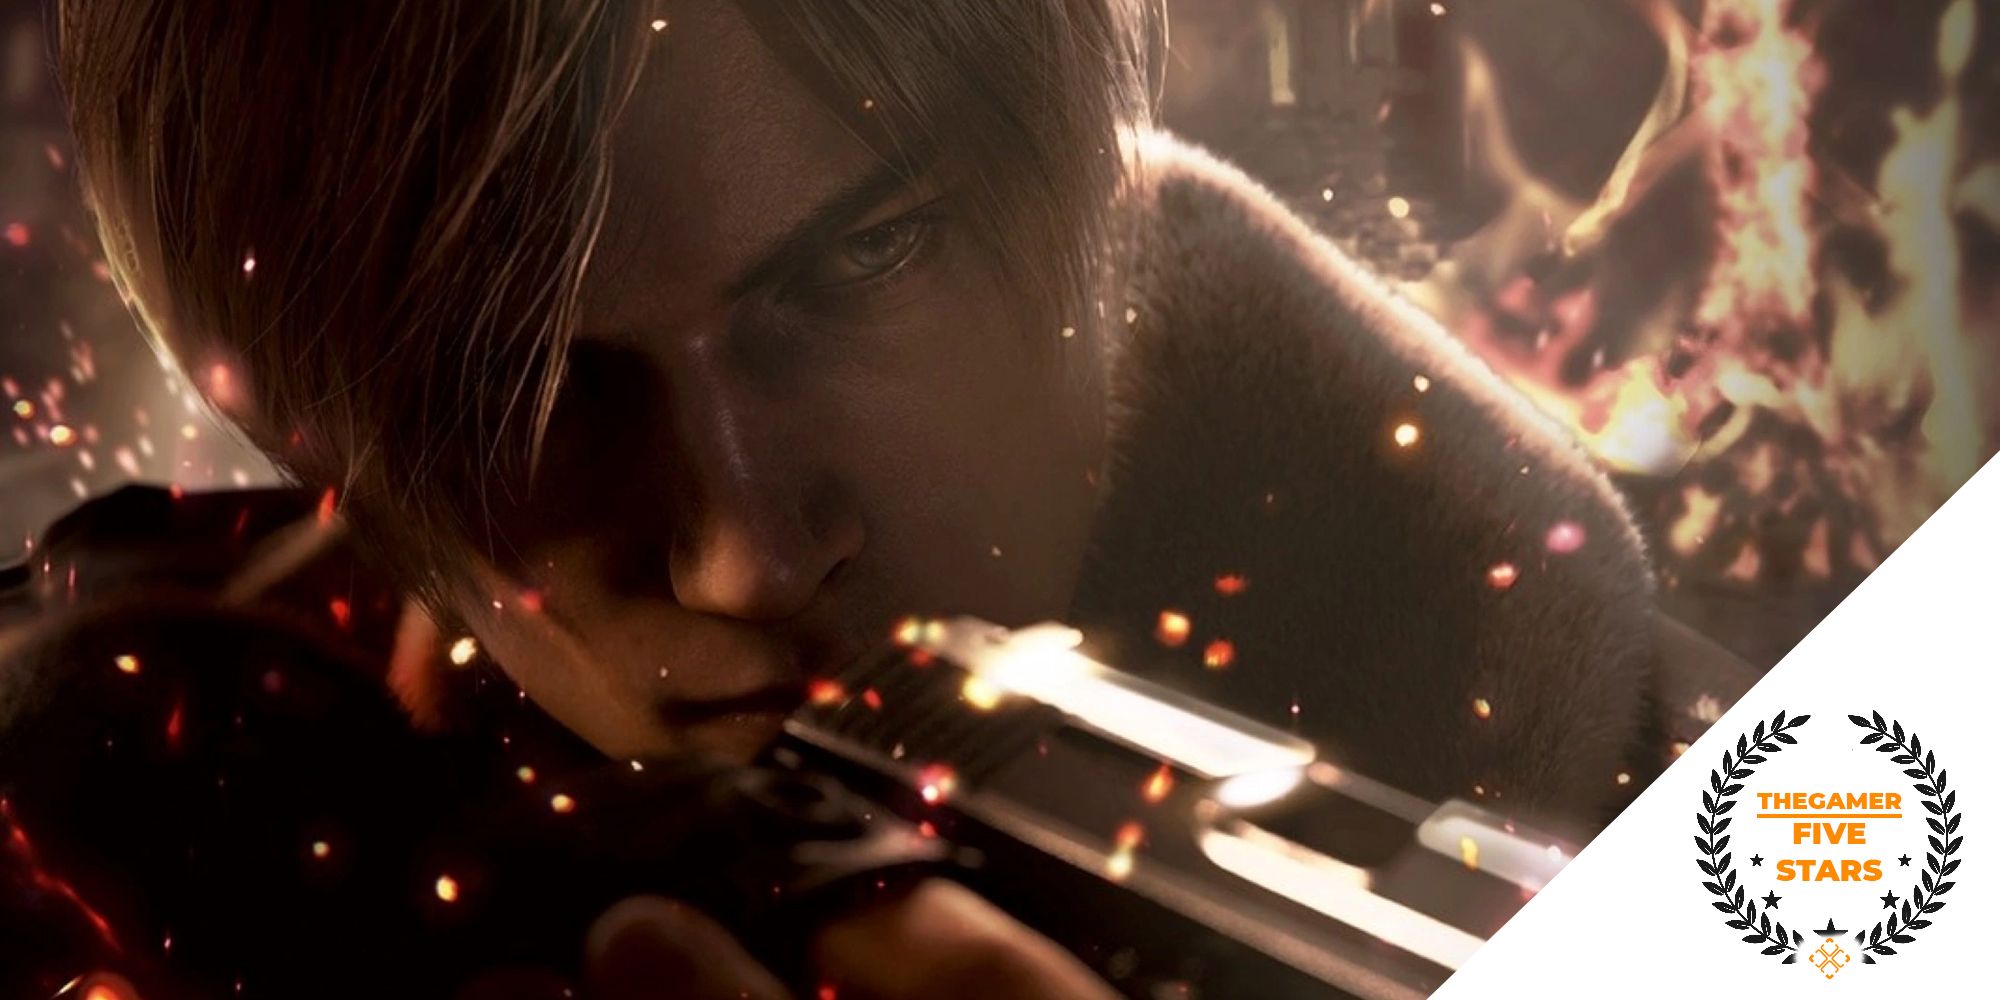 Leon standing in the middle of a fire pointing a gun sideways past the camera with a five stars accolade over the top